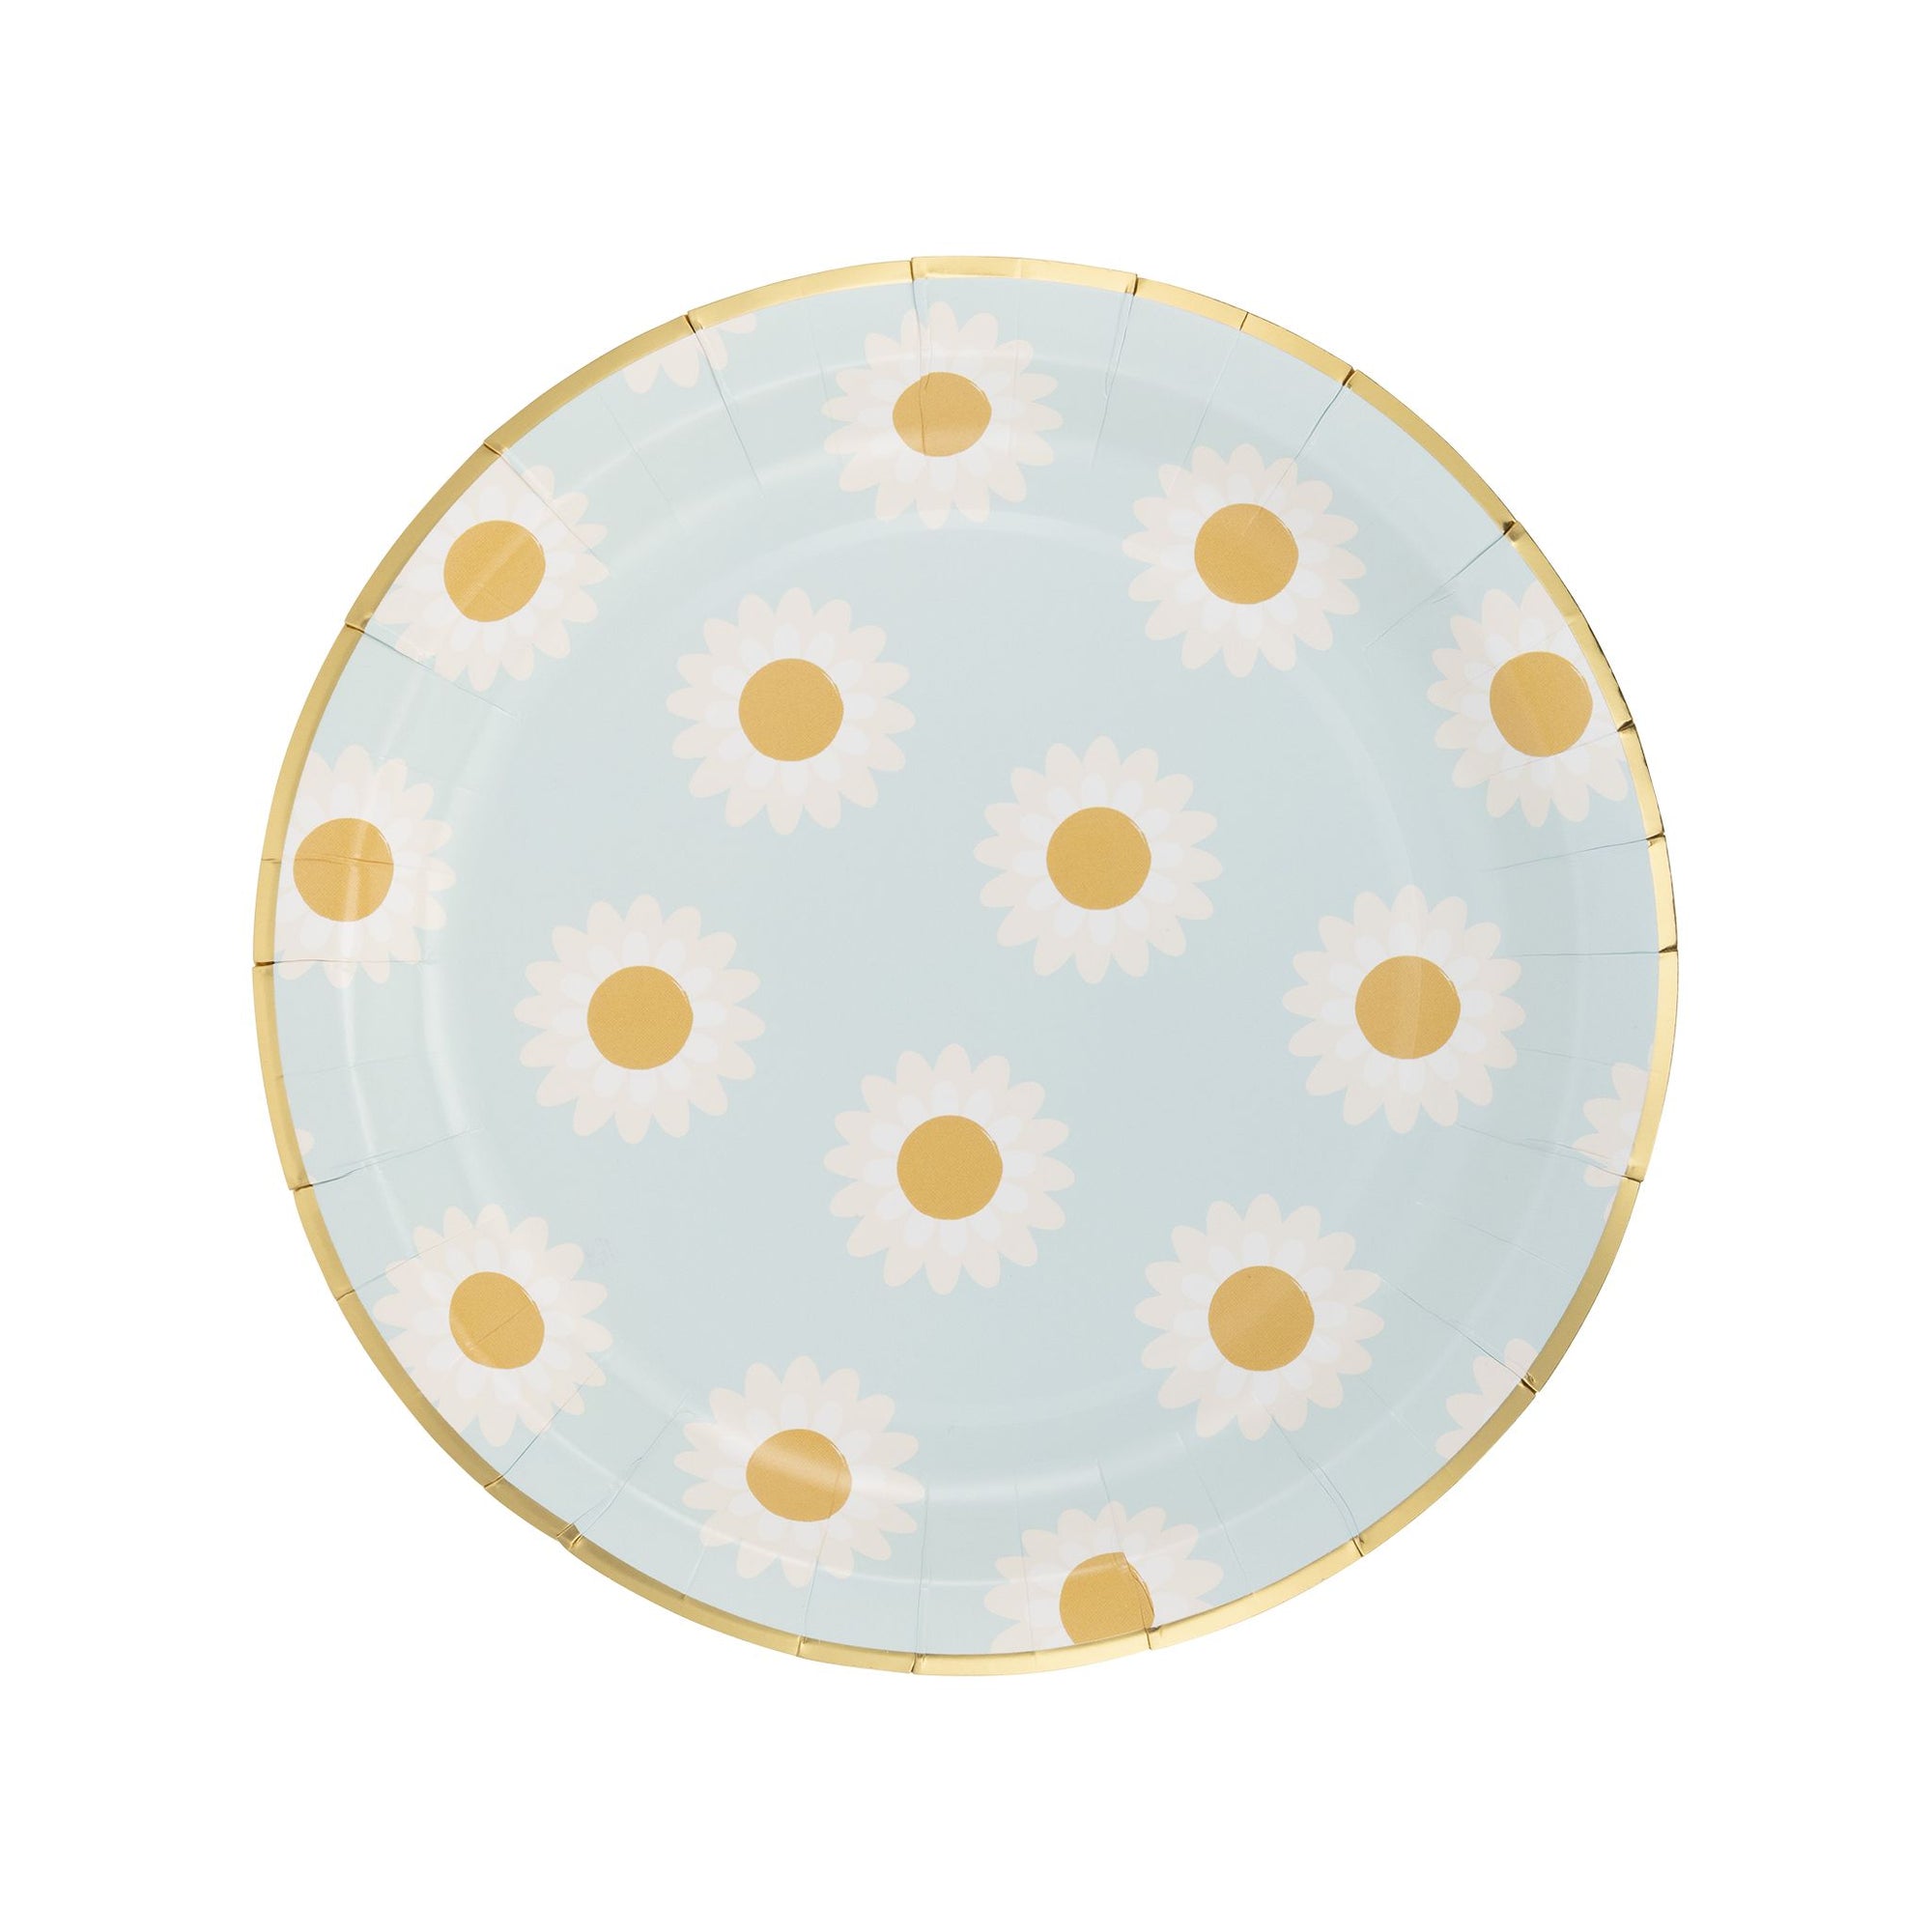 Daisies Paper Plate - The Preppy Bunny